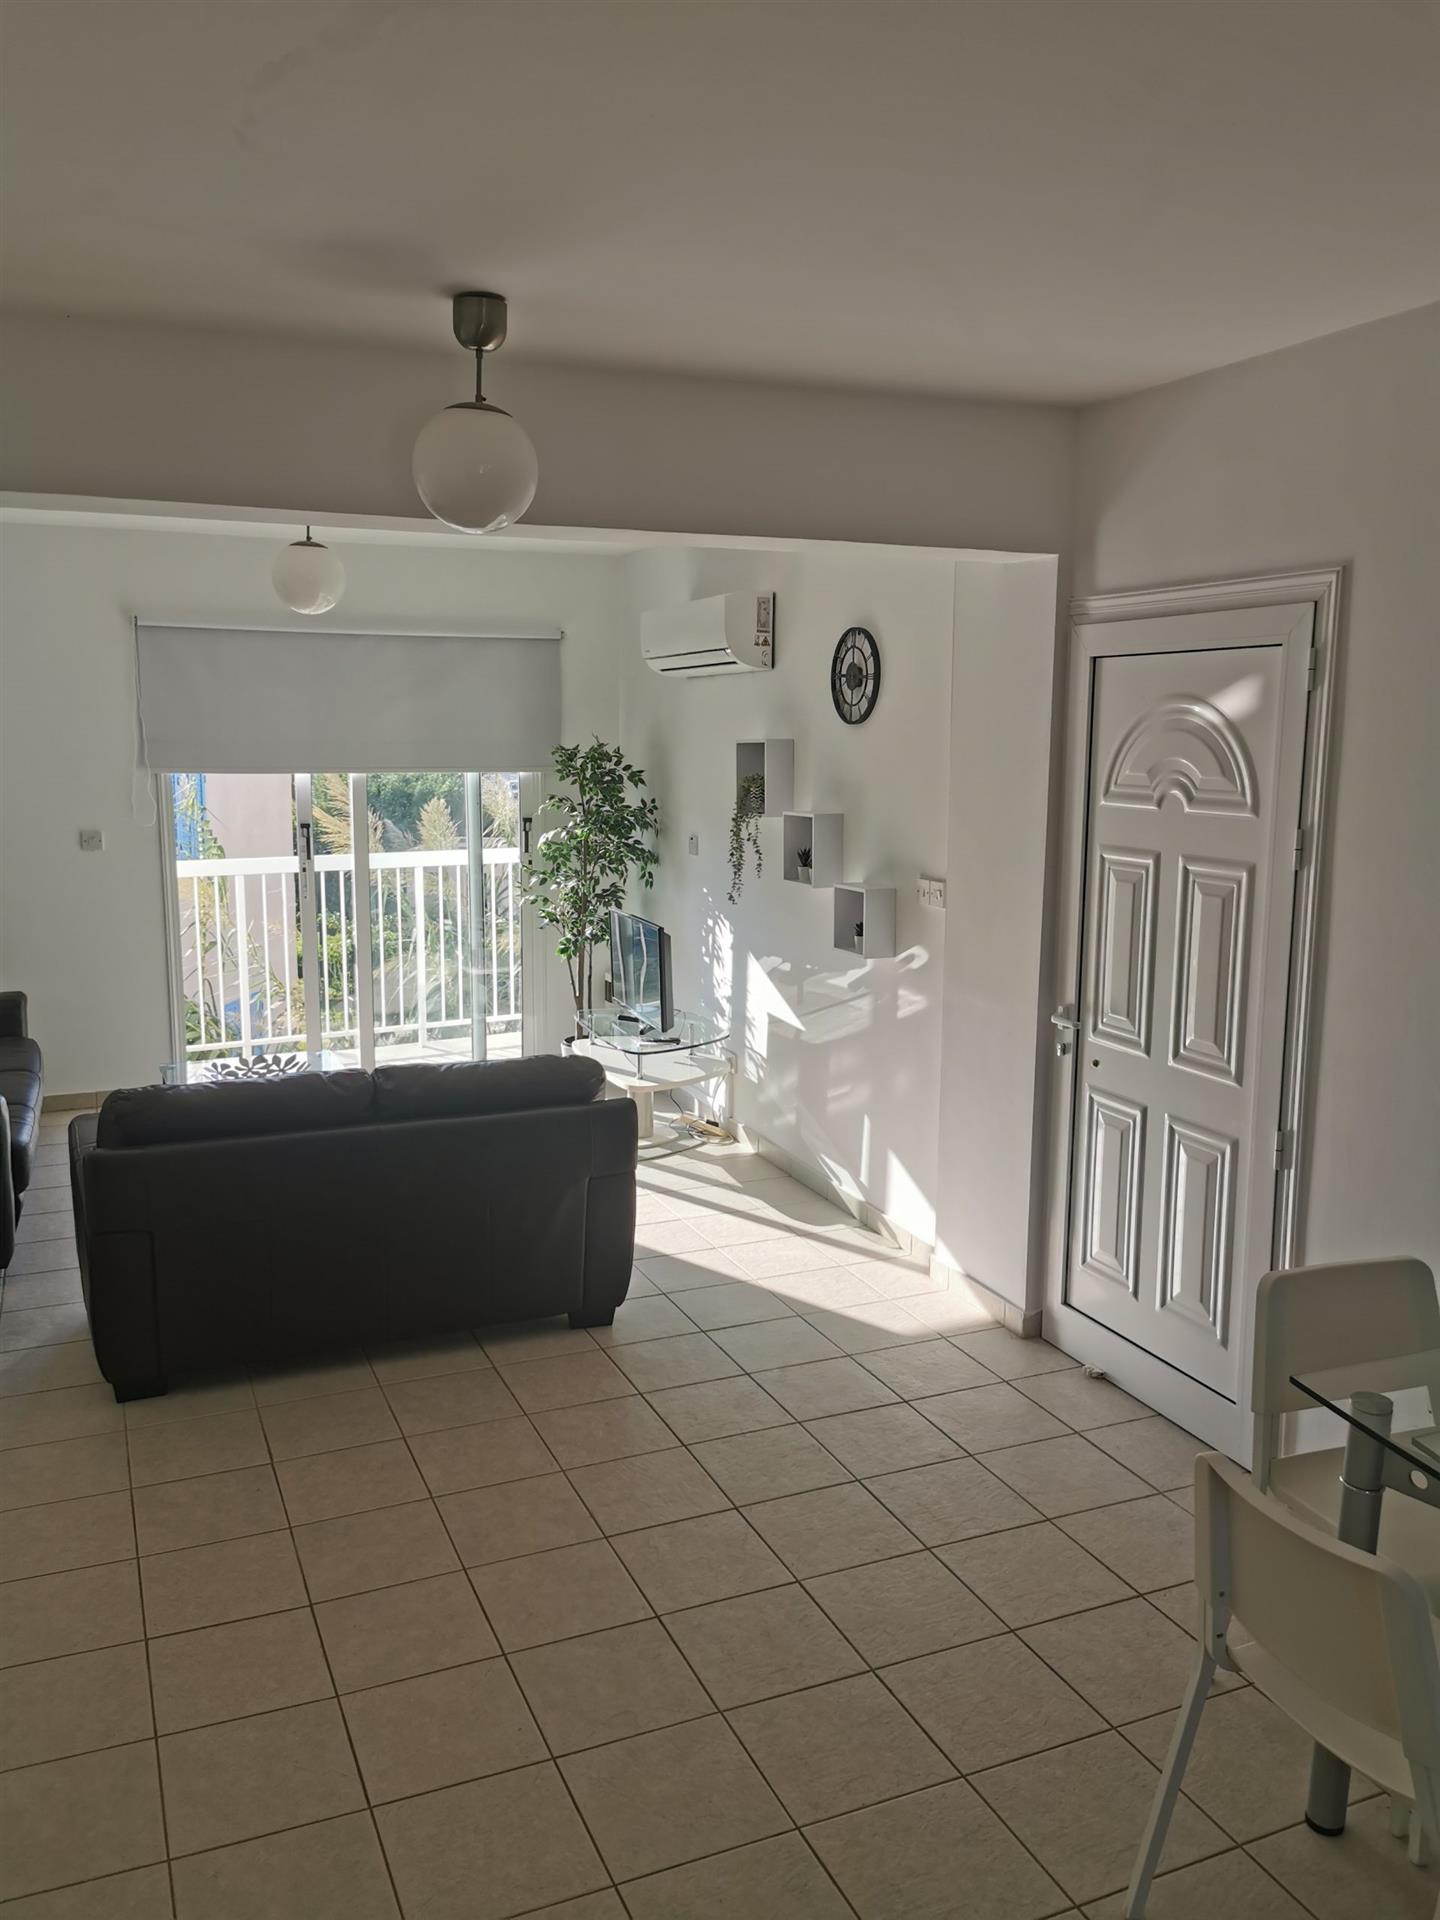 REF:  BR29B Two bedroom Apartment Winter Months Only November-April